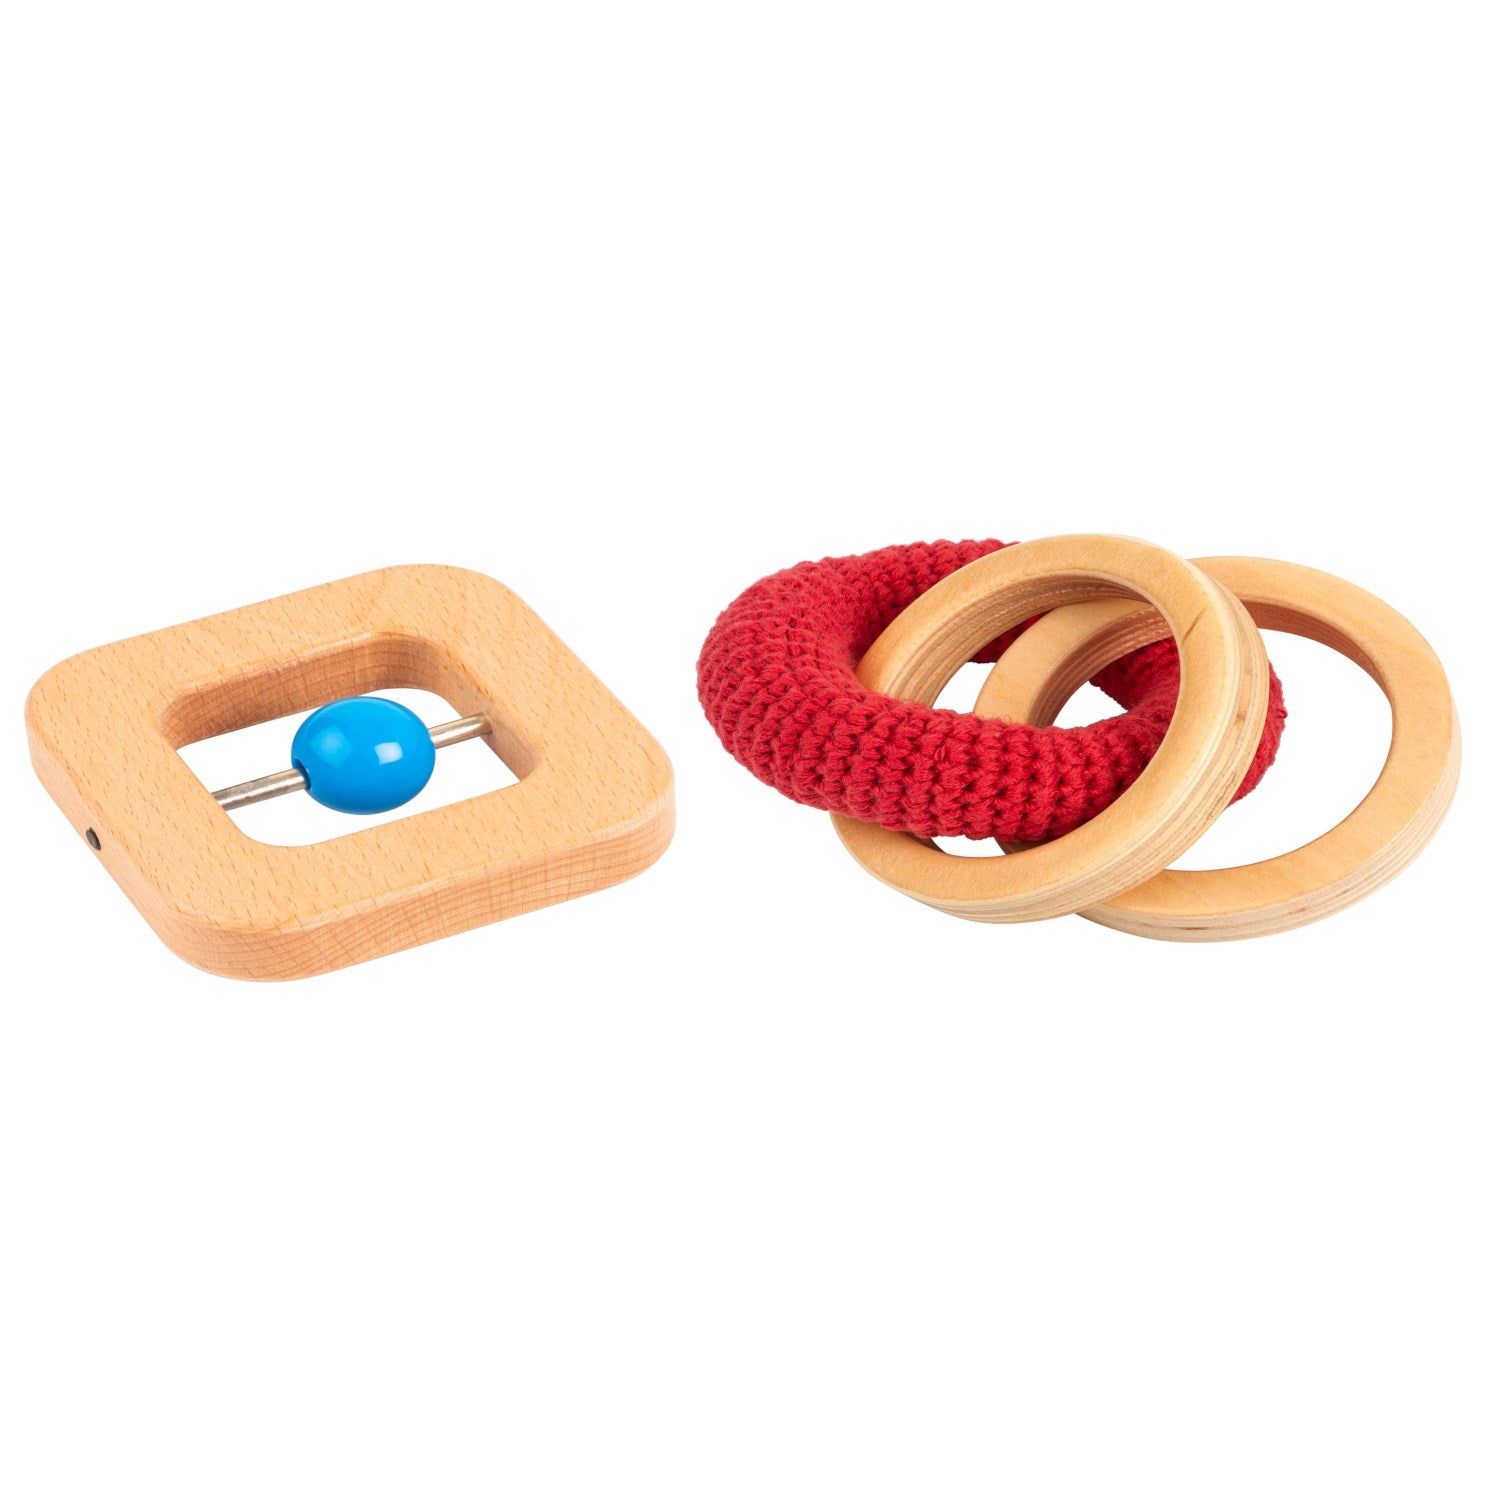 Educo: Wooden Rattle and Rings set